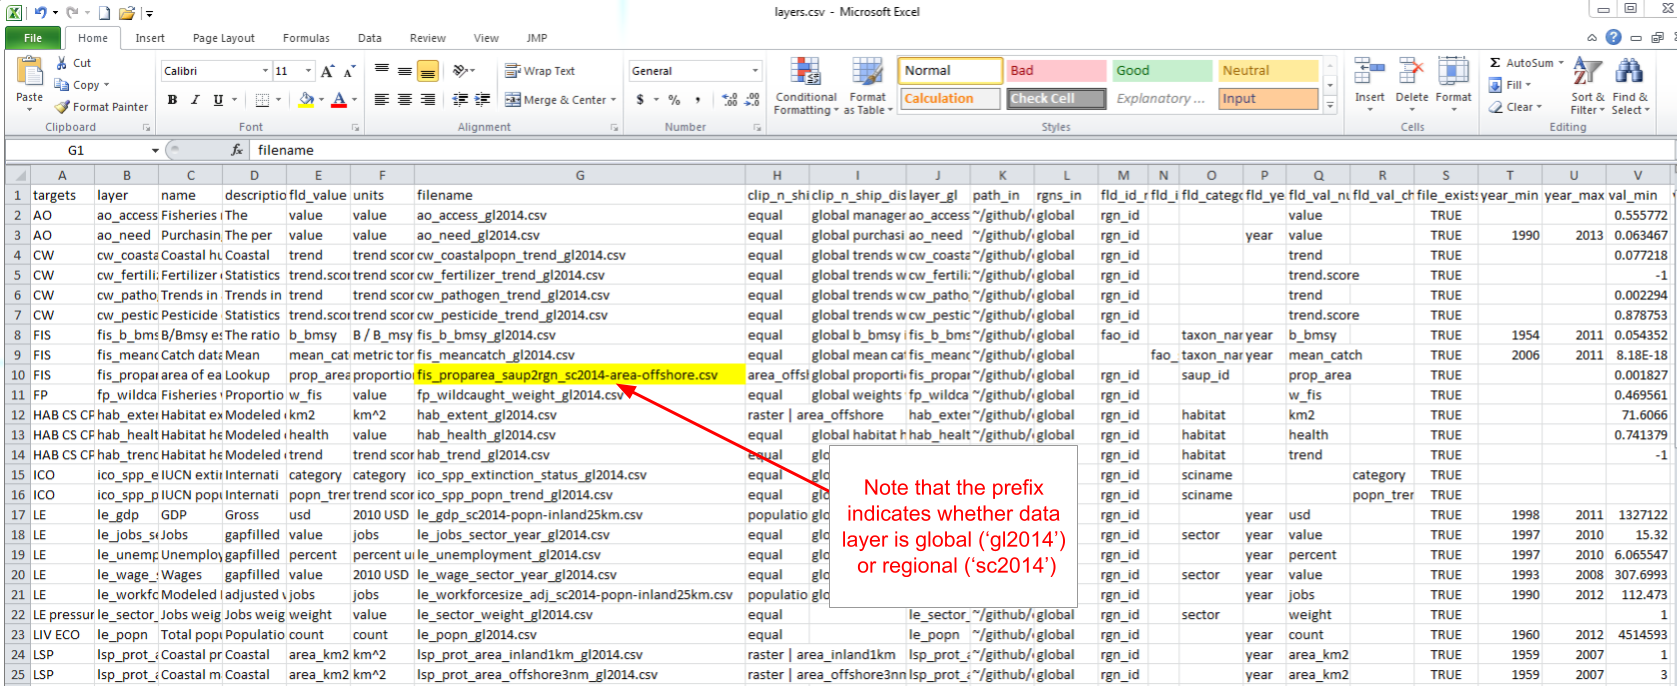 Register new layers in layers.csv. Be sure to note if there is a change in the filename.